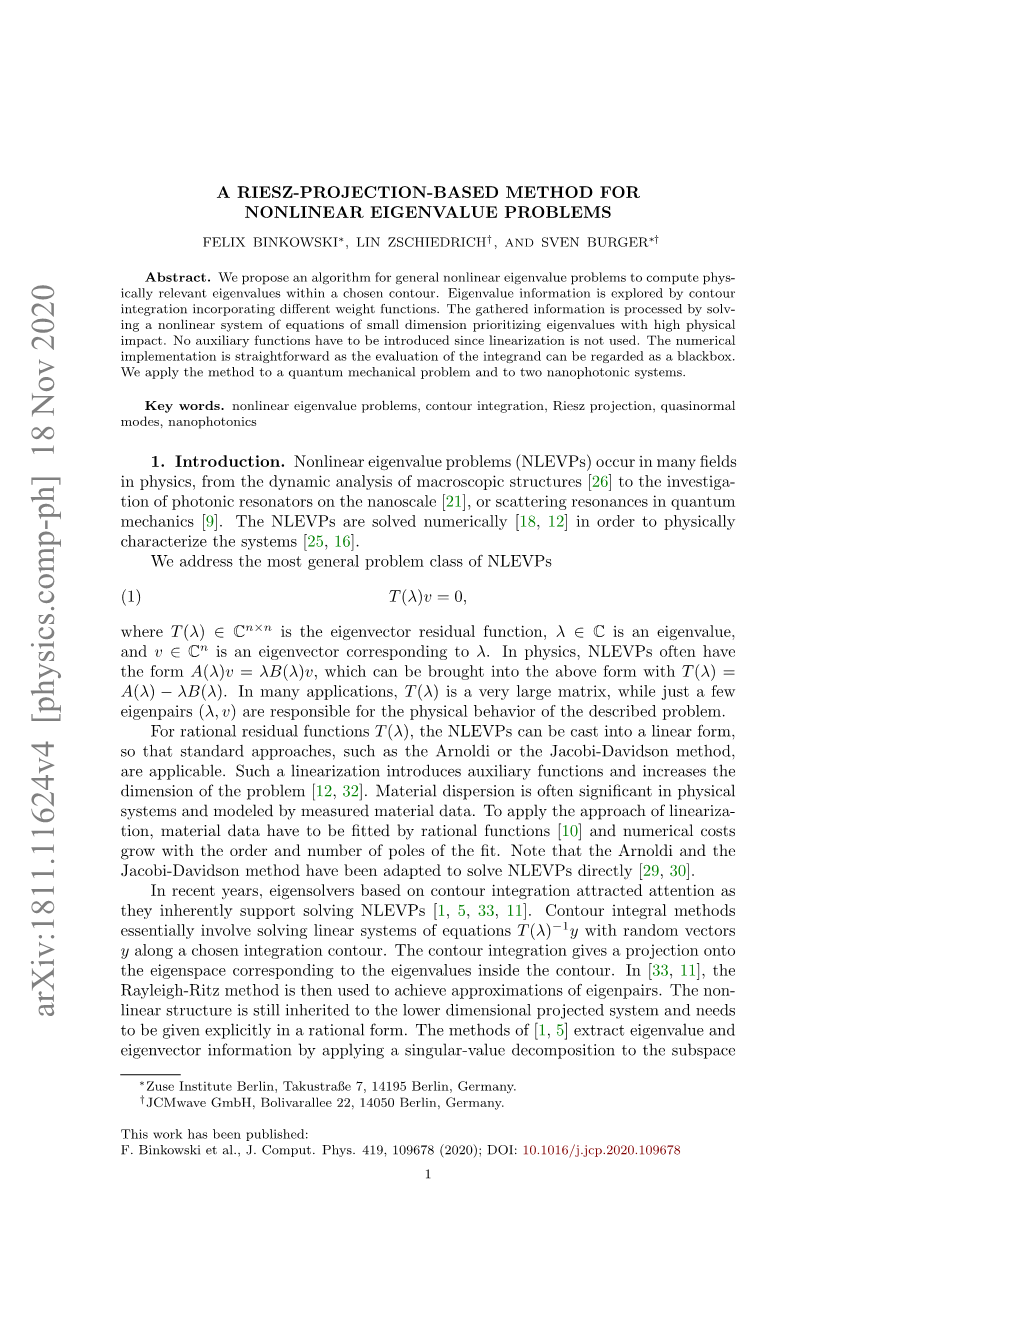 A Riesz-Projection-Based Method for Nonlinear Eigenvalue Problems